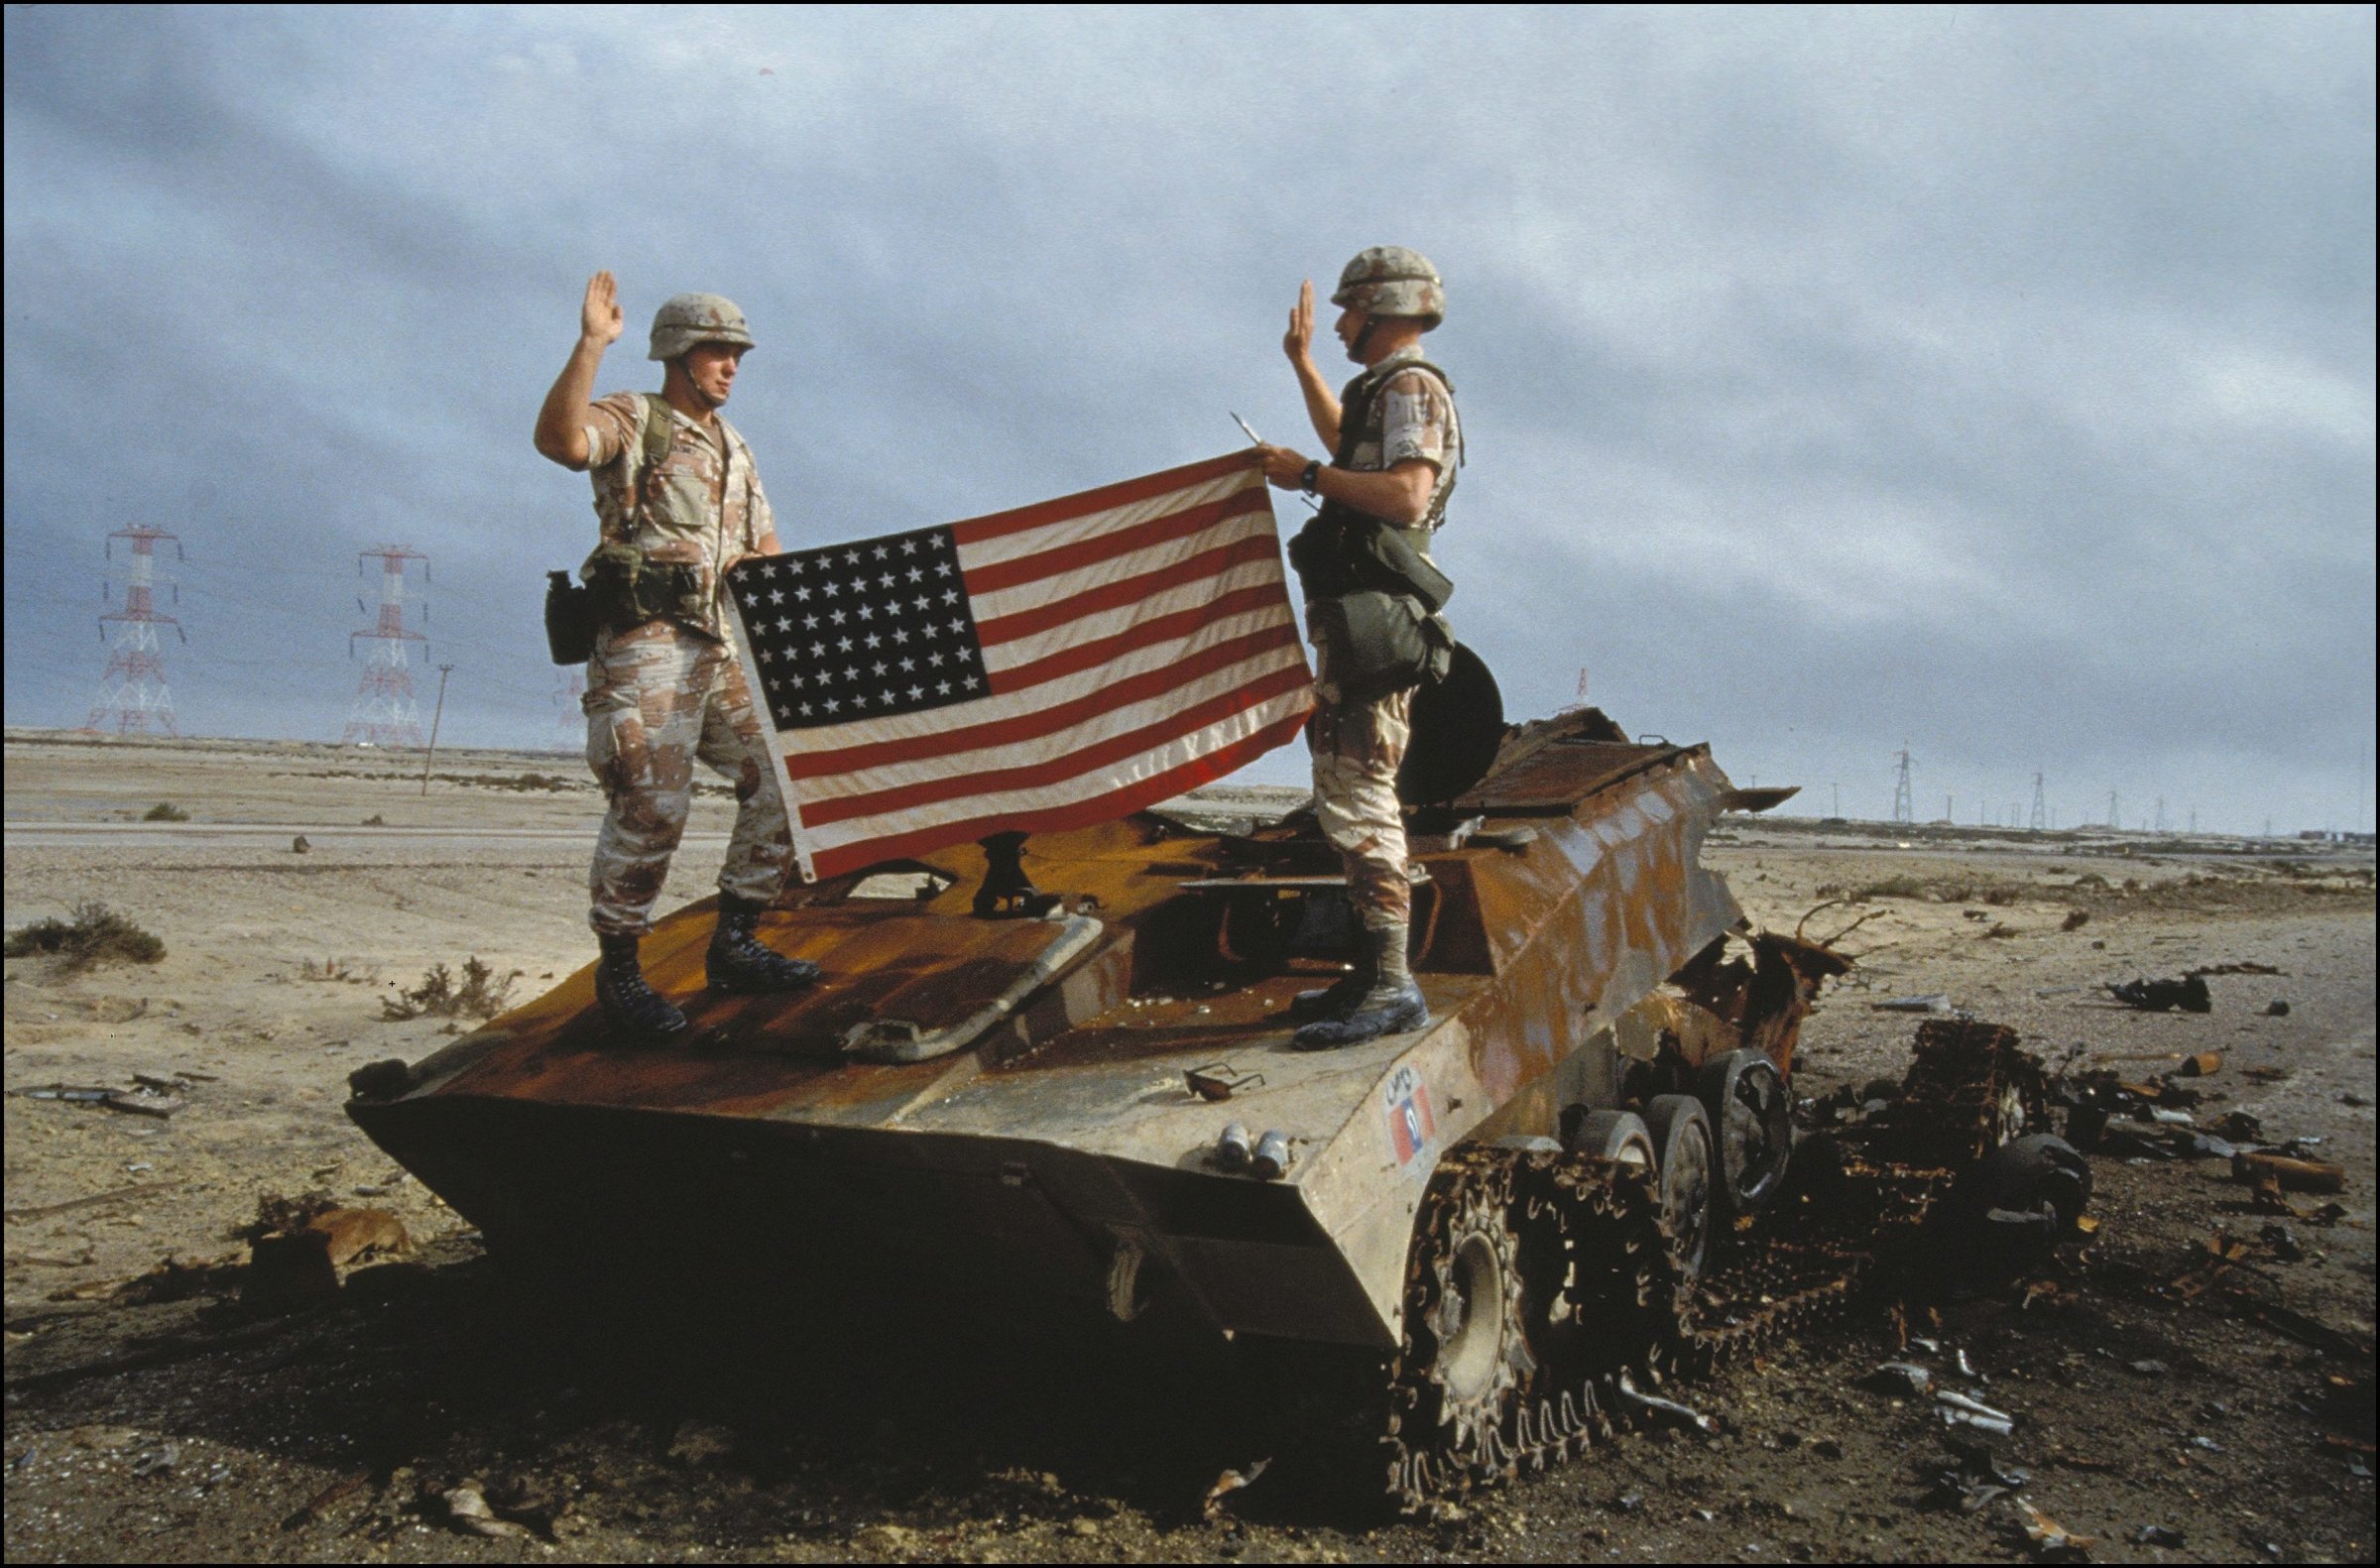 US soldiers take oath to the US army on an Iraqi destroyed tank in Iraq on February 27th, 1991.